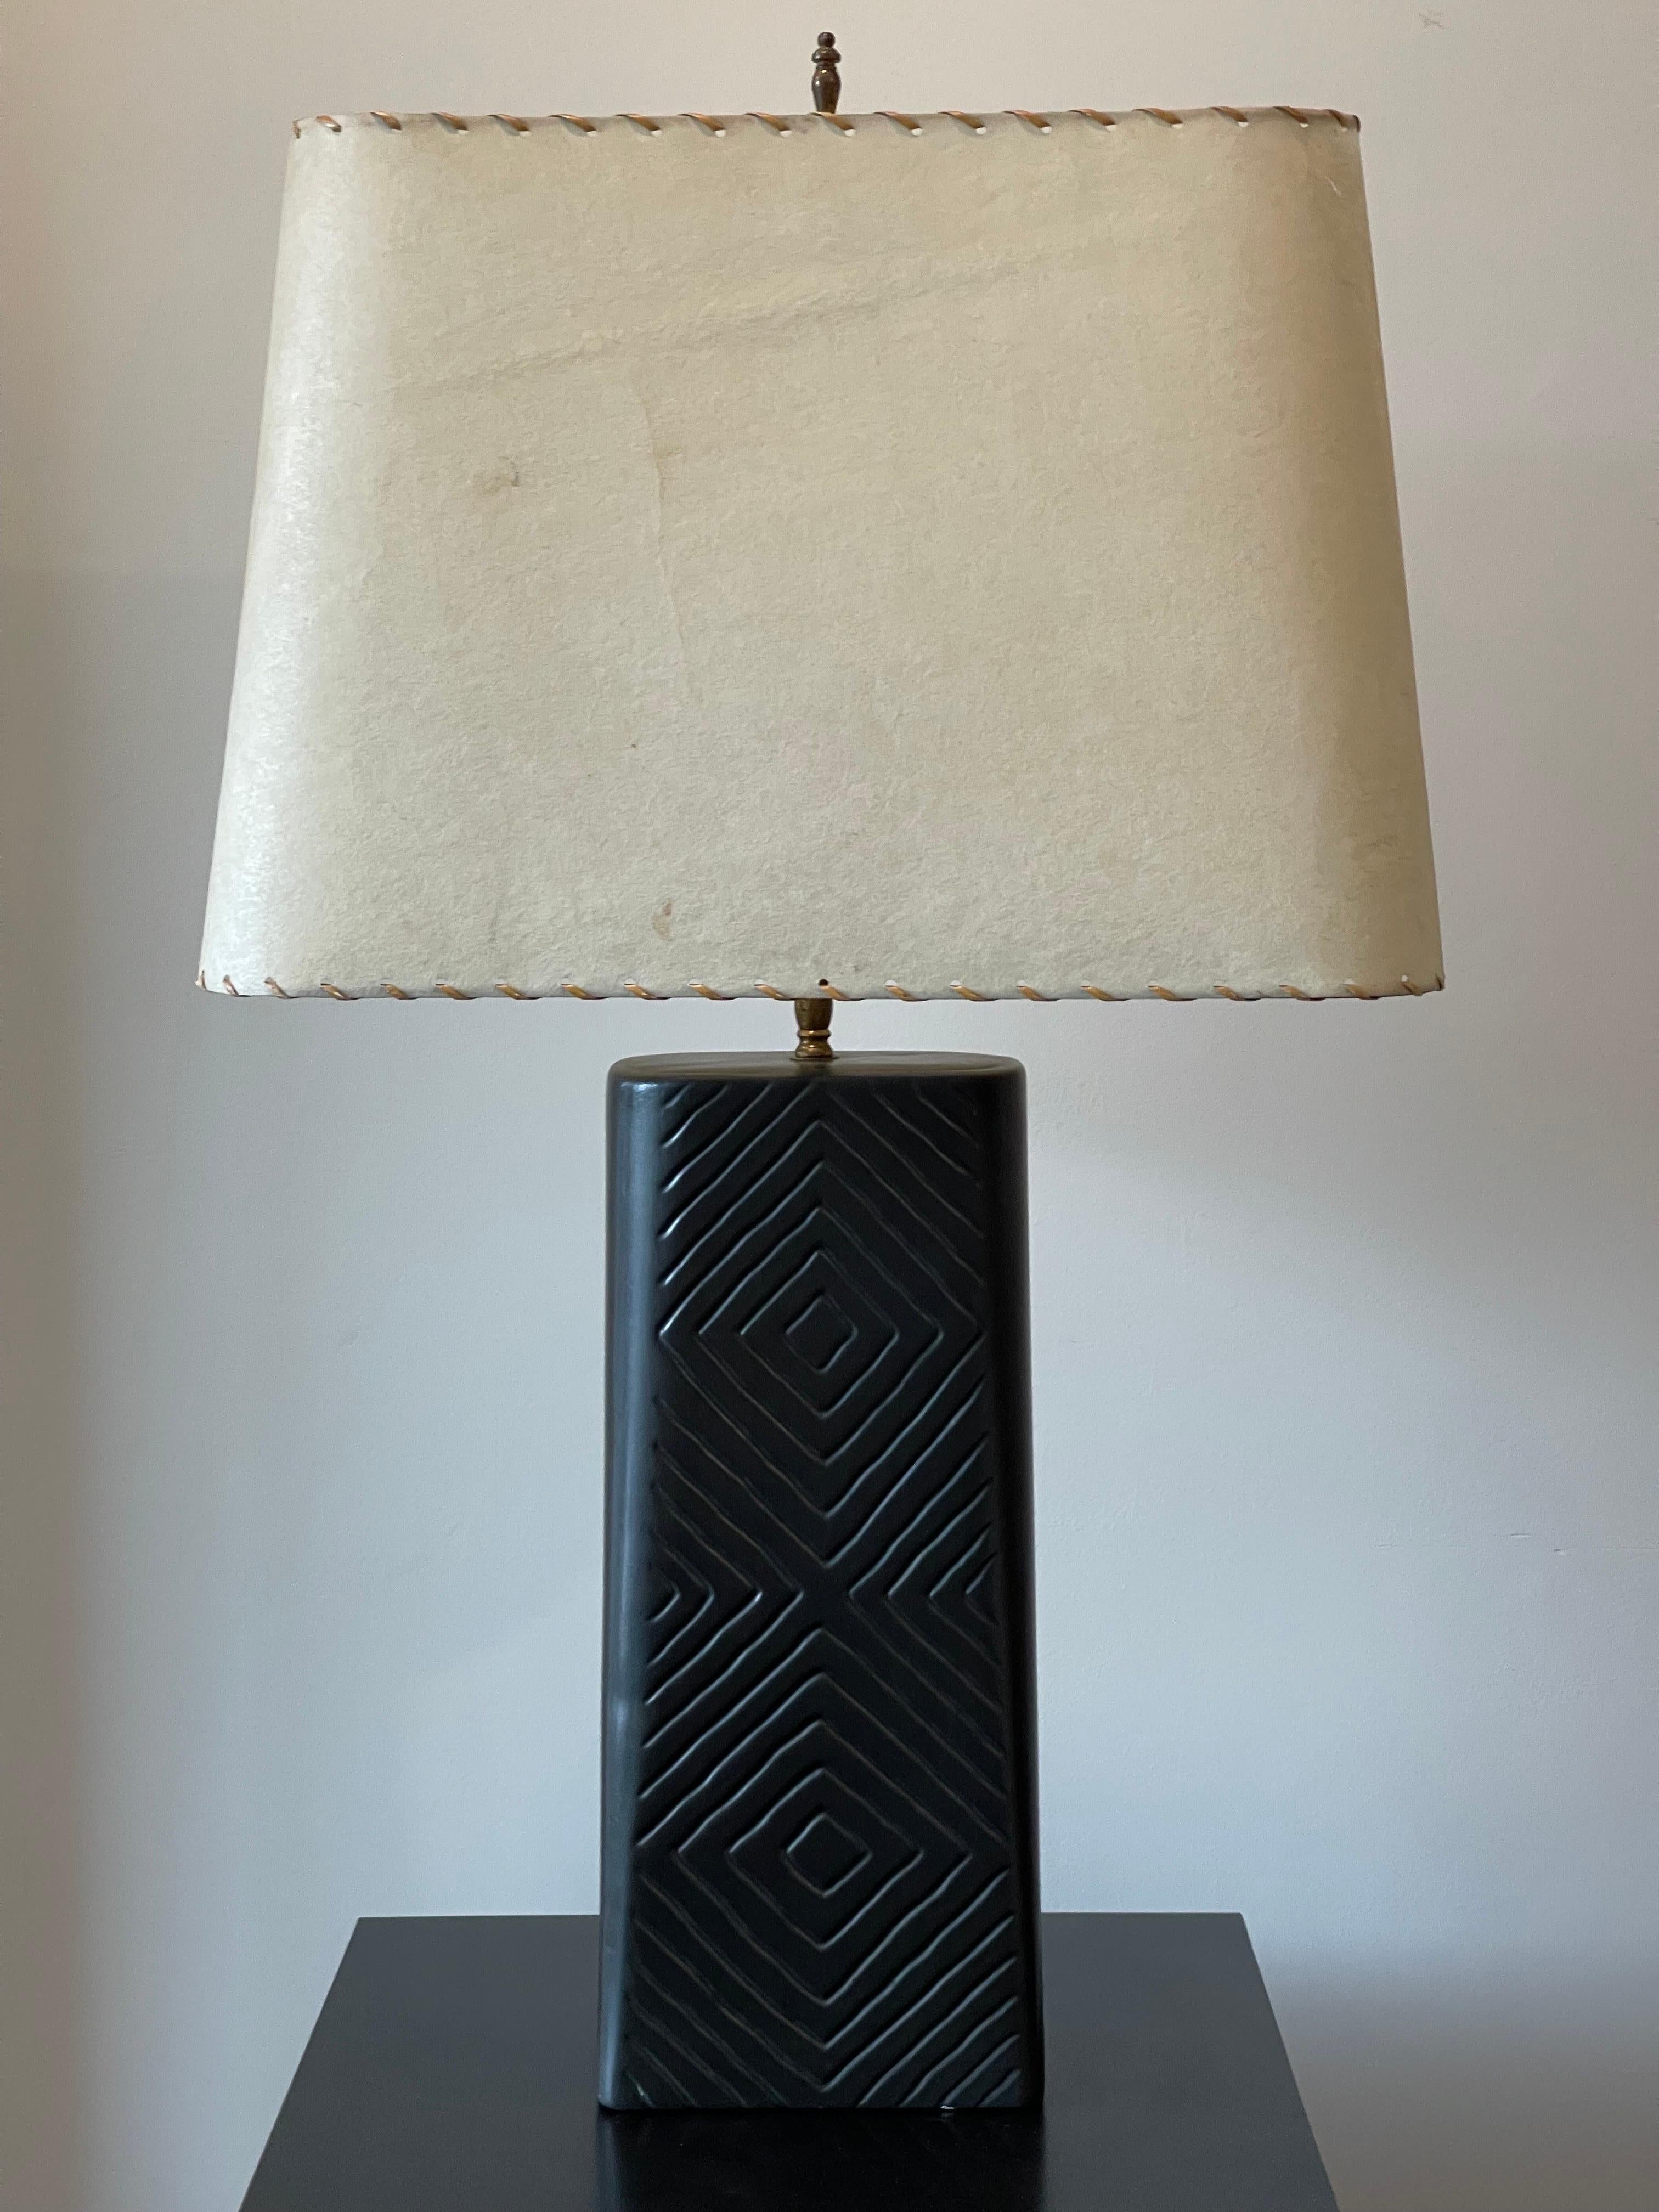 Large Mid-Century Modern Ceramic Table Lamp with Original Shade  In Good Condition For Sale In Framingham, MA